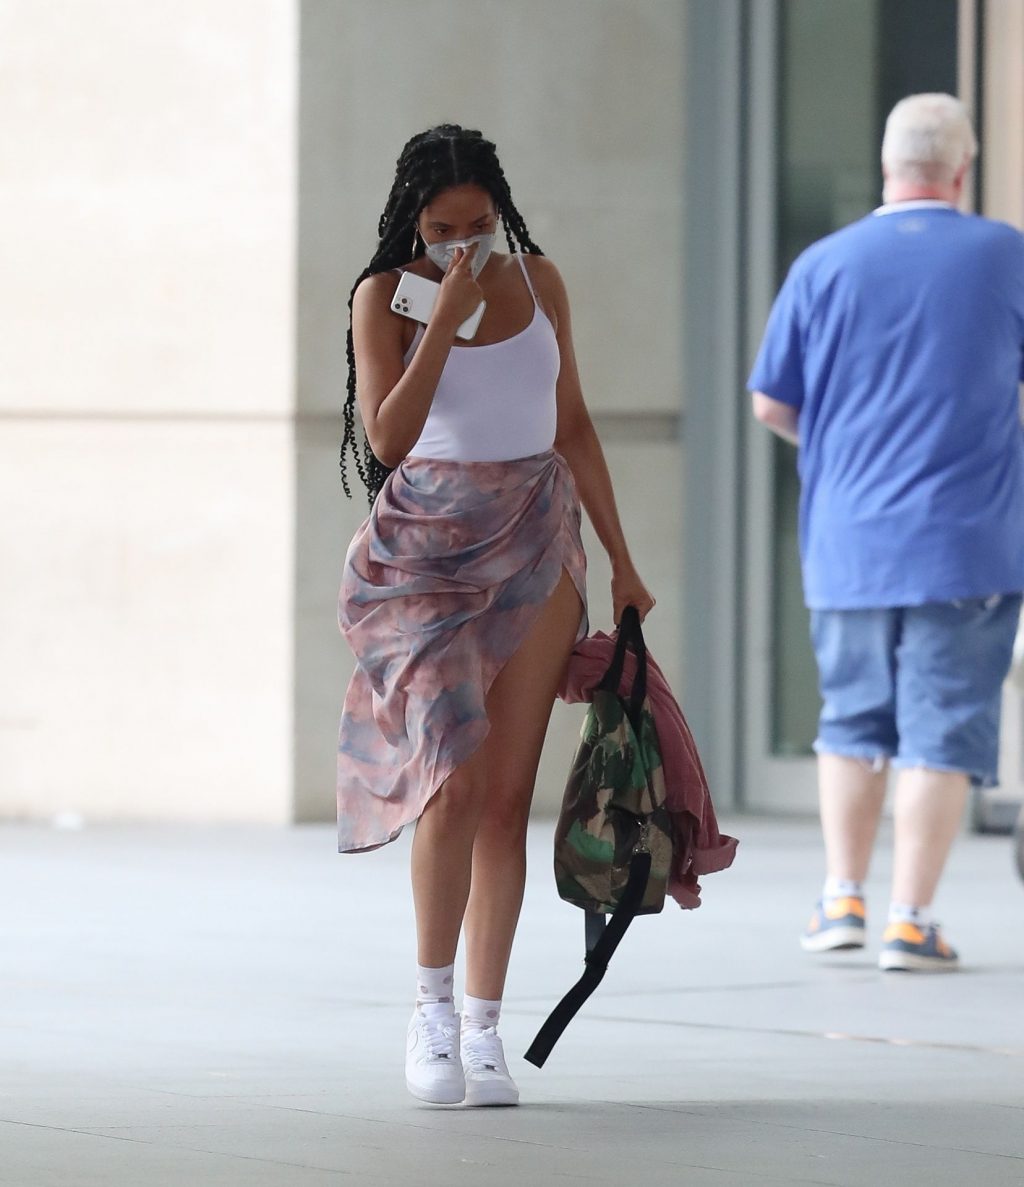 Yasmin Evan Was Pictured While Leaving the BBC Broadcasting House (17 Photos)